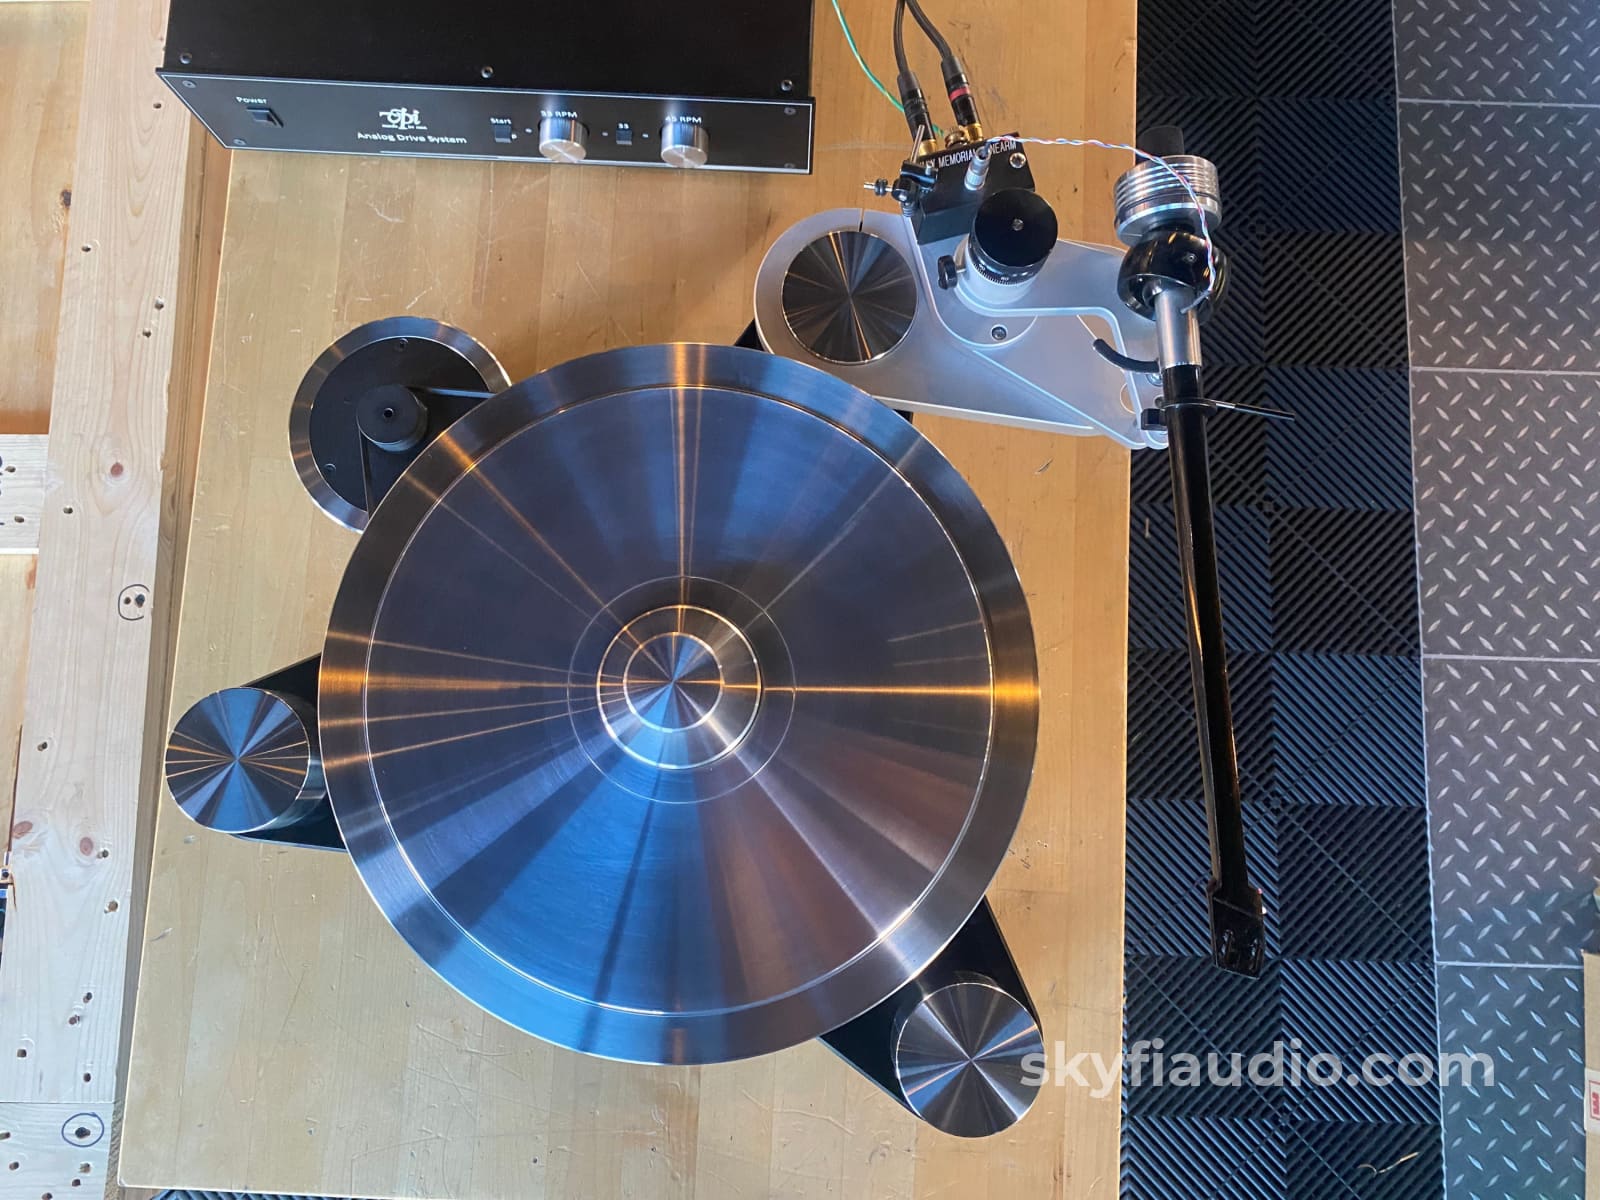 Vpi Avenger Reference Turntable With Gimbal Tonearm And Upgrades